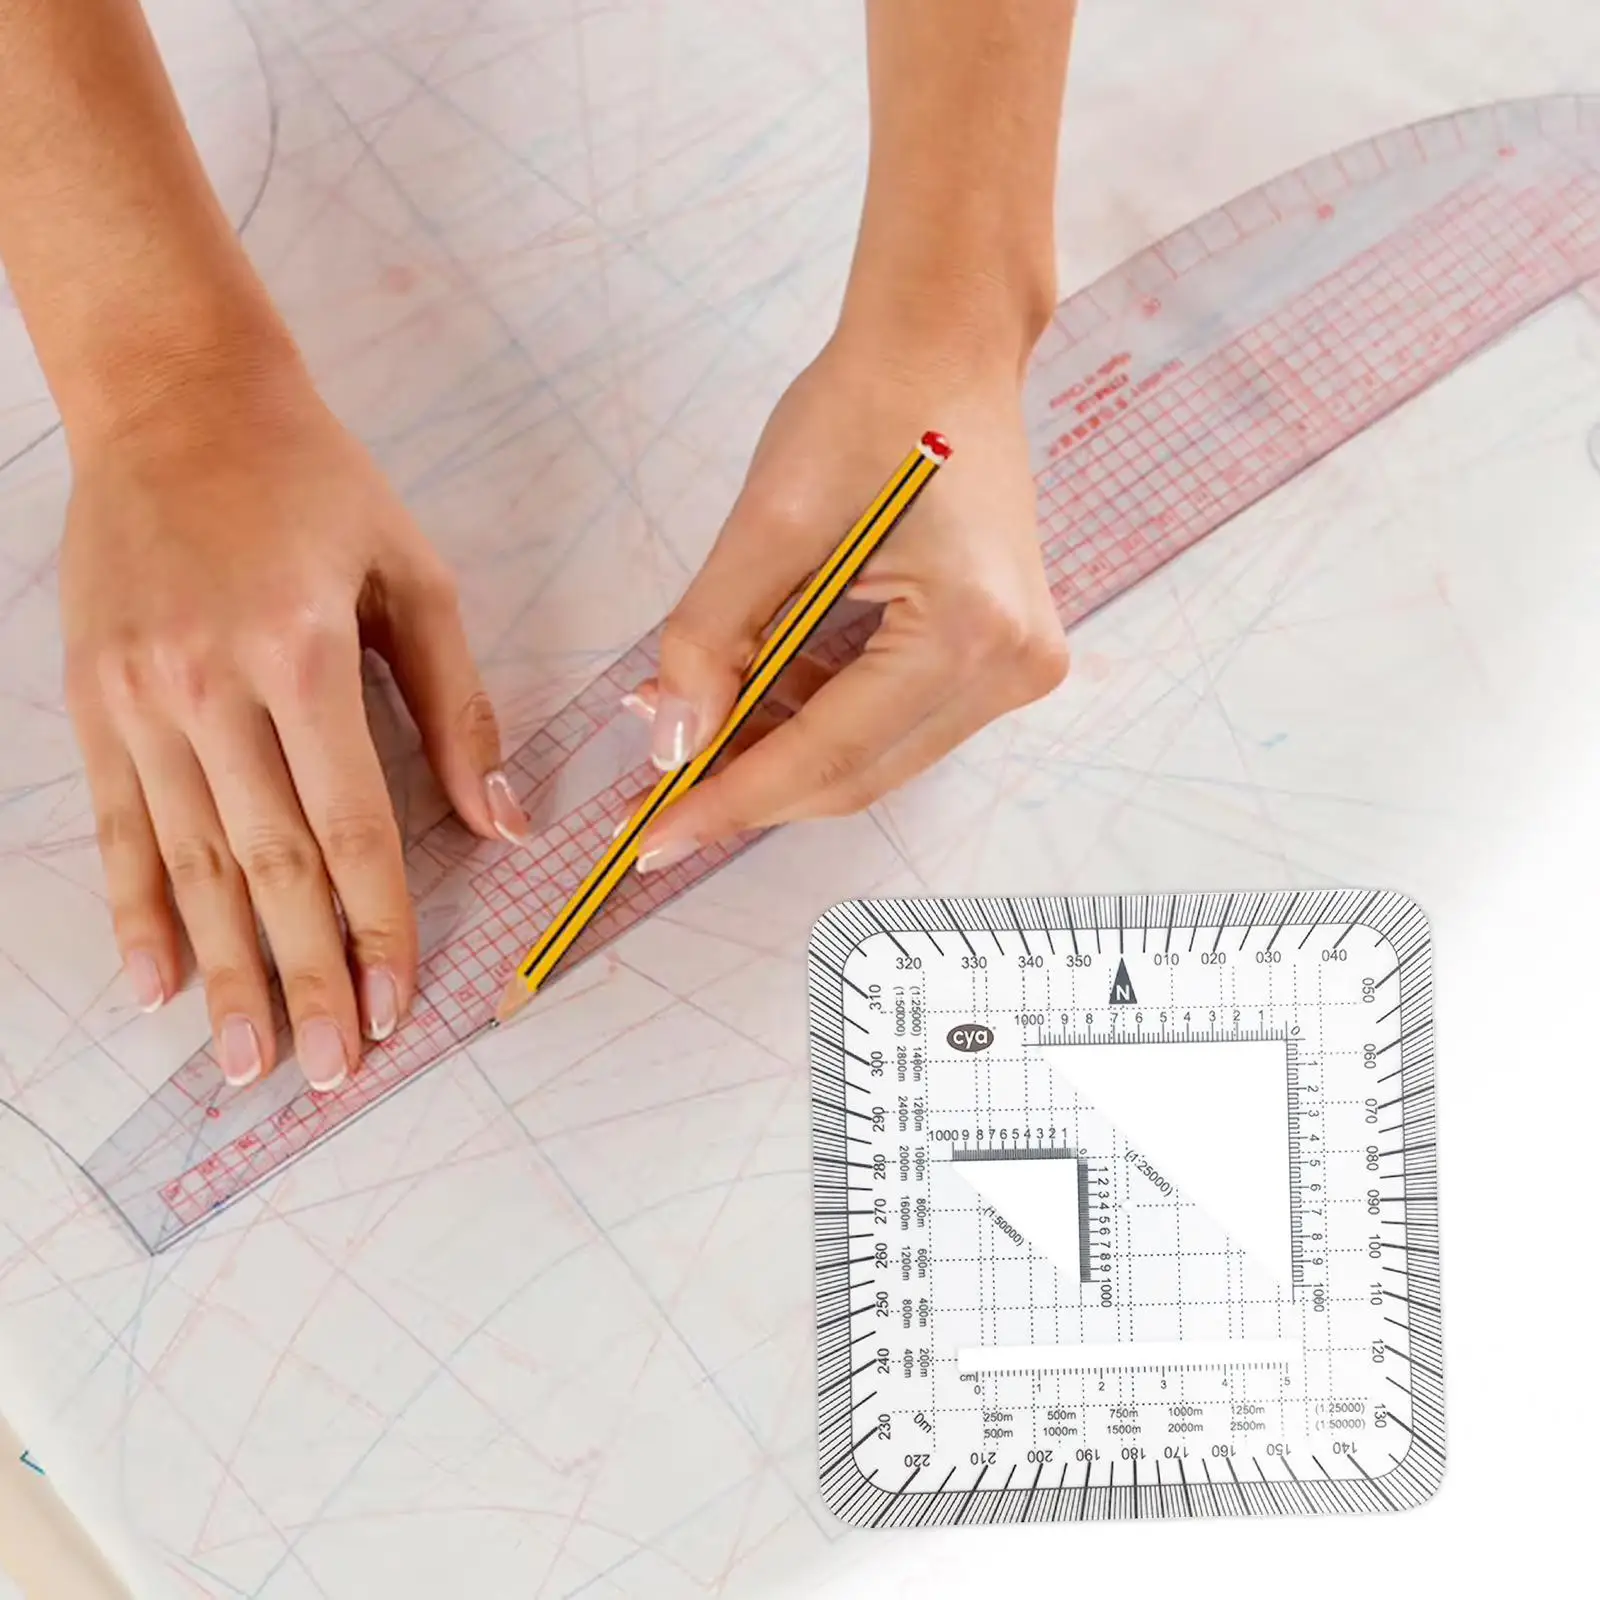 Protractor Ruler Engineering 1:25,000 1:50,000 Accurate Protractor Maptool Pocket Grid for Utm, Usng, Mgrs Coordinates Outdoor